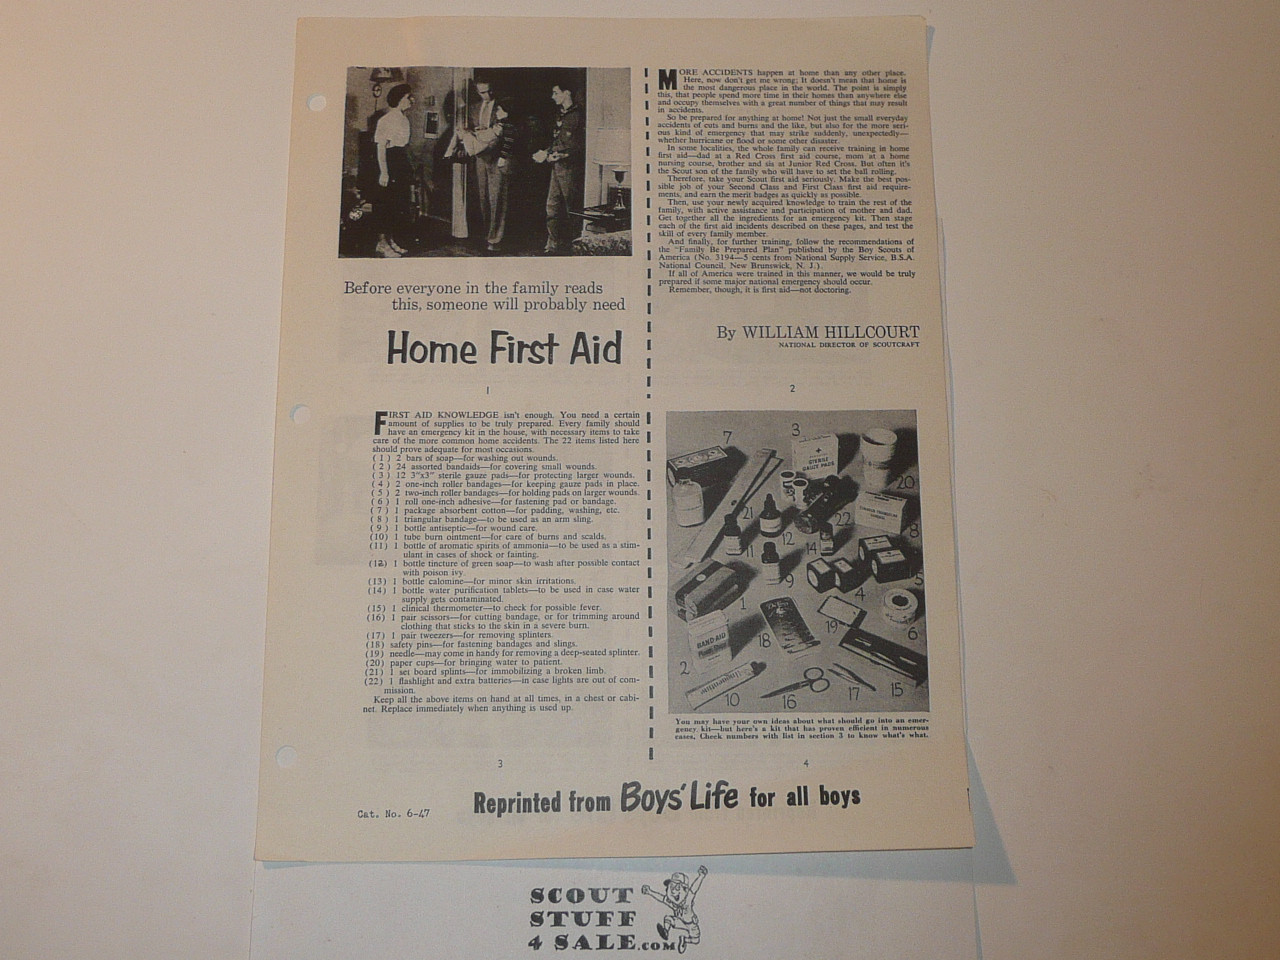 Home First Aid, By Green Bar Bill, Boys' Life Single Topic Reprint from the 1950's - 1960's , written for Scouts, great teaching materials